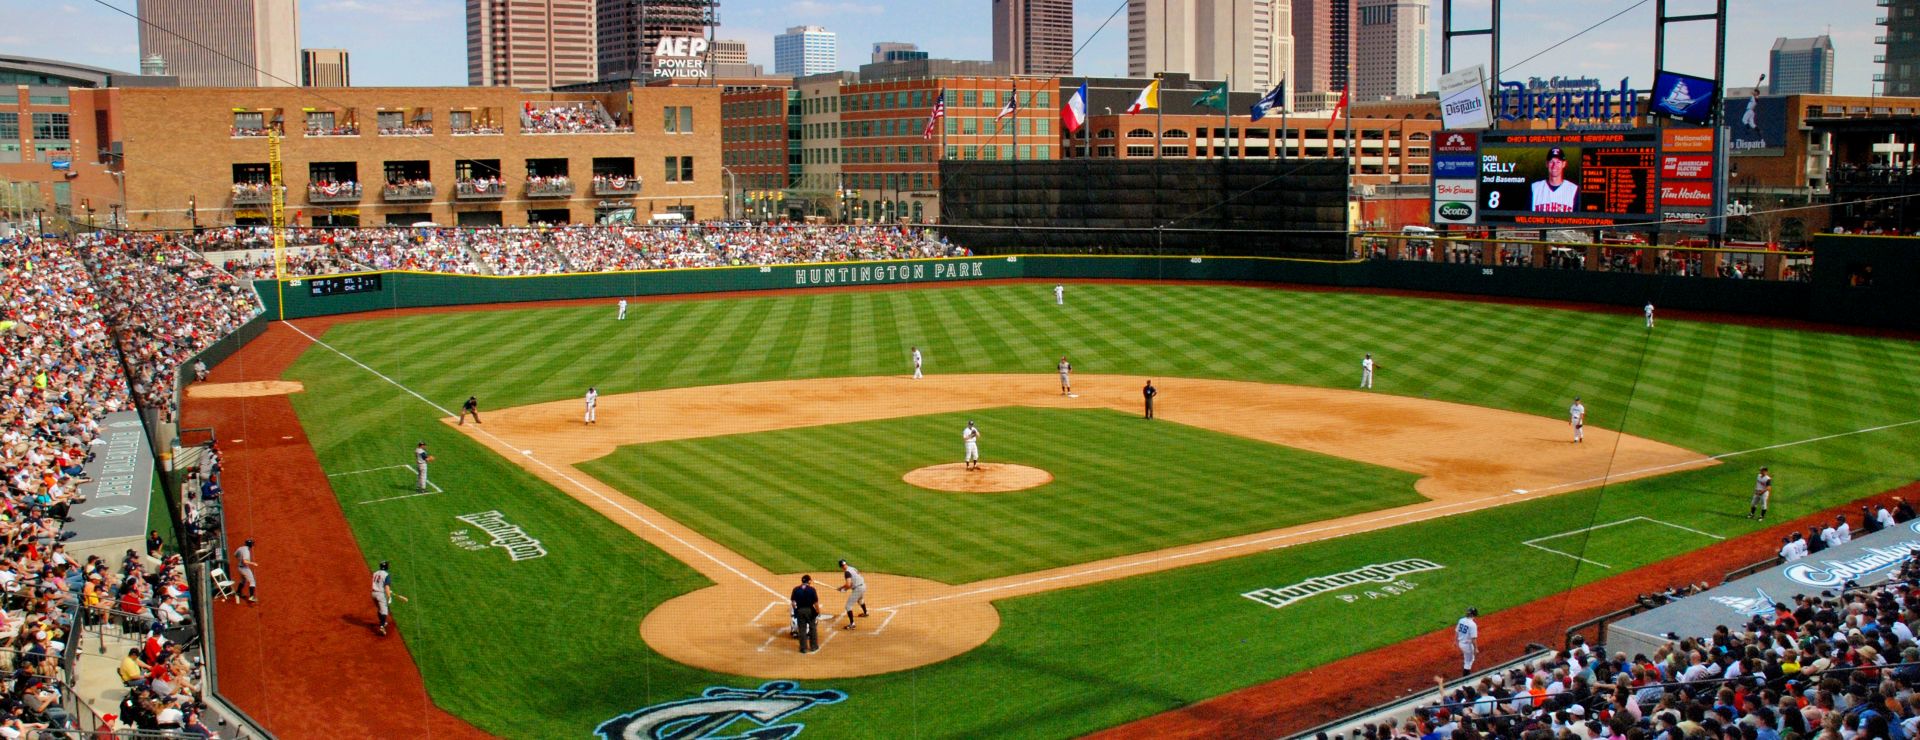 columbus clippers